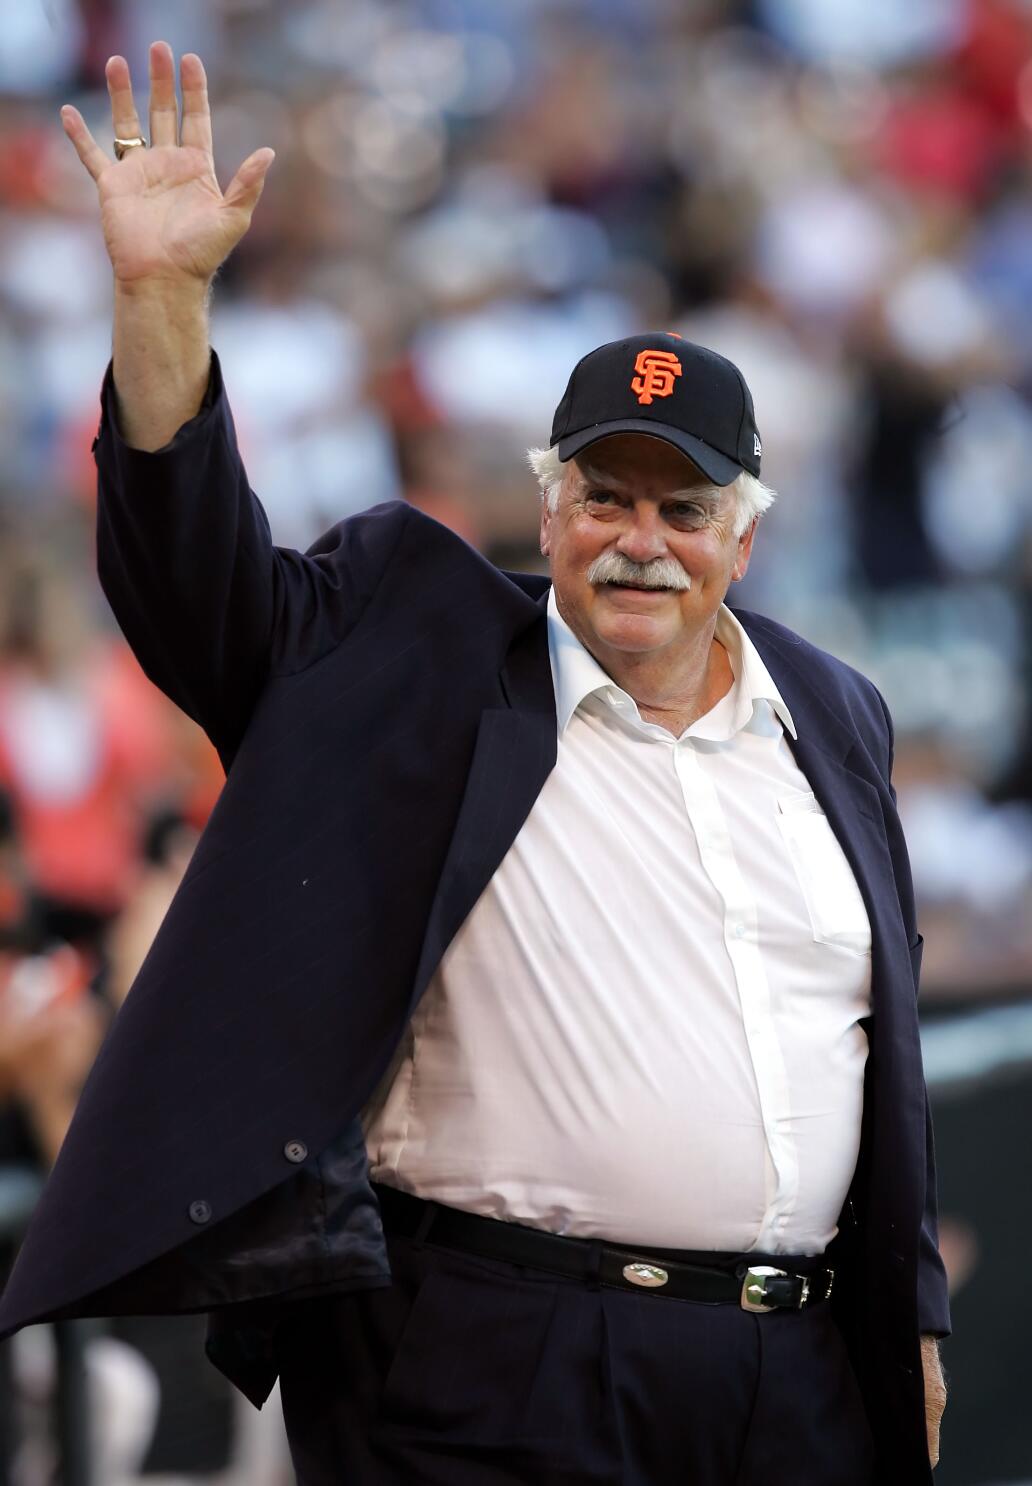 OTD: Apollo 11 Moon Landing and Gaylord Perry's First Home Run, by San  Francisco Giants